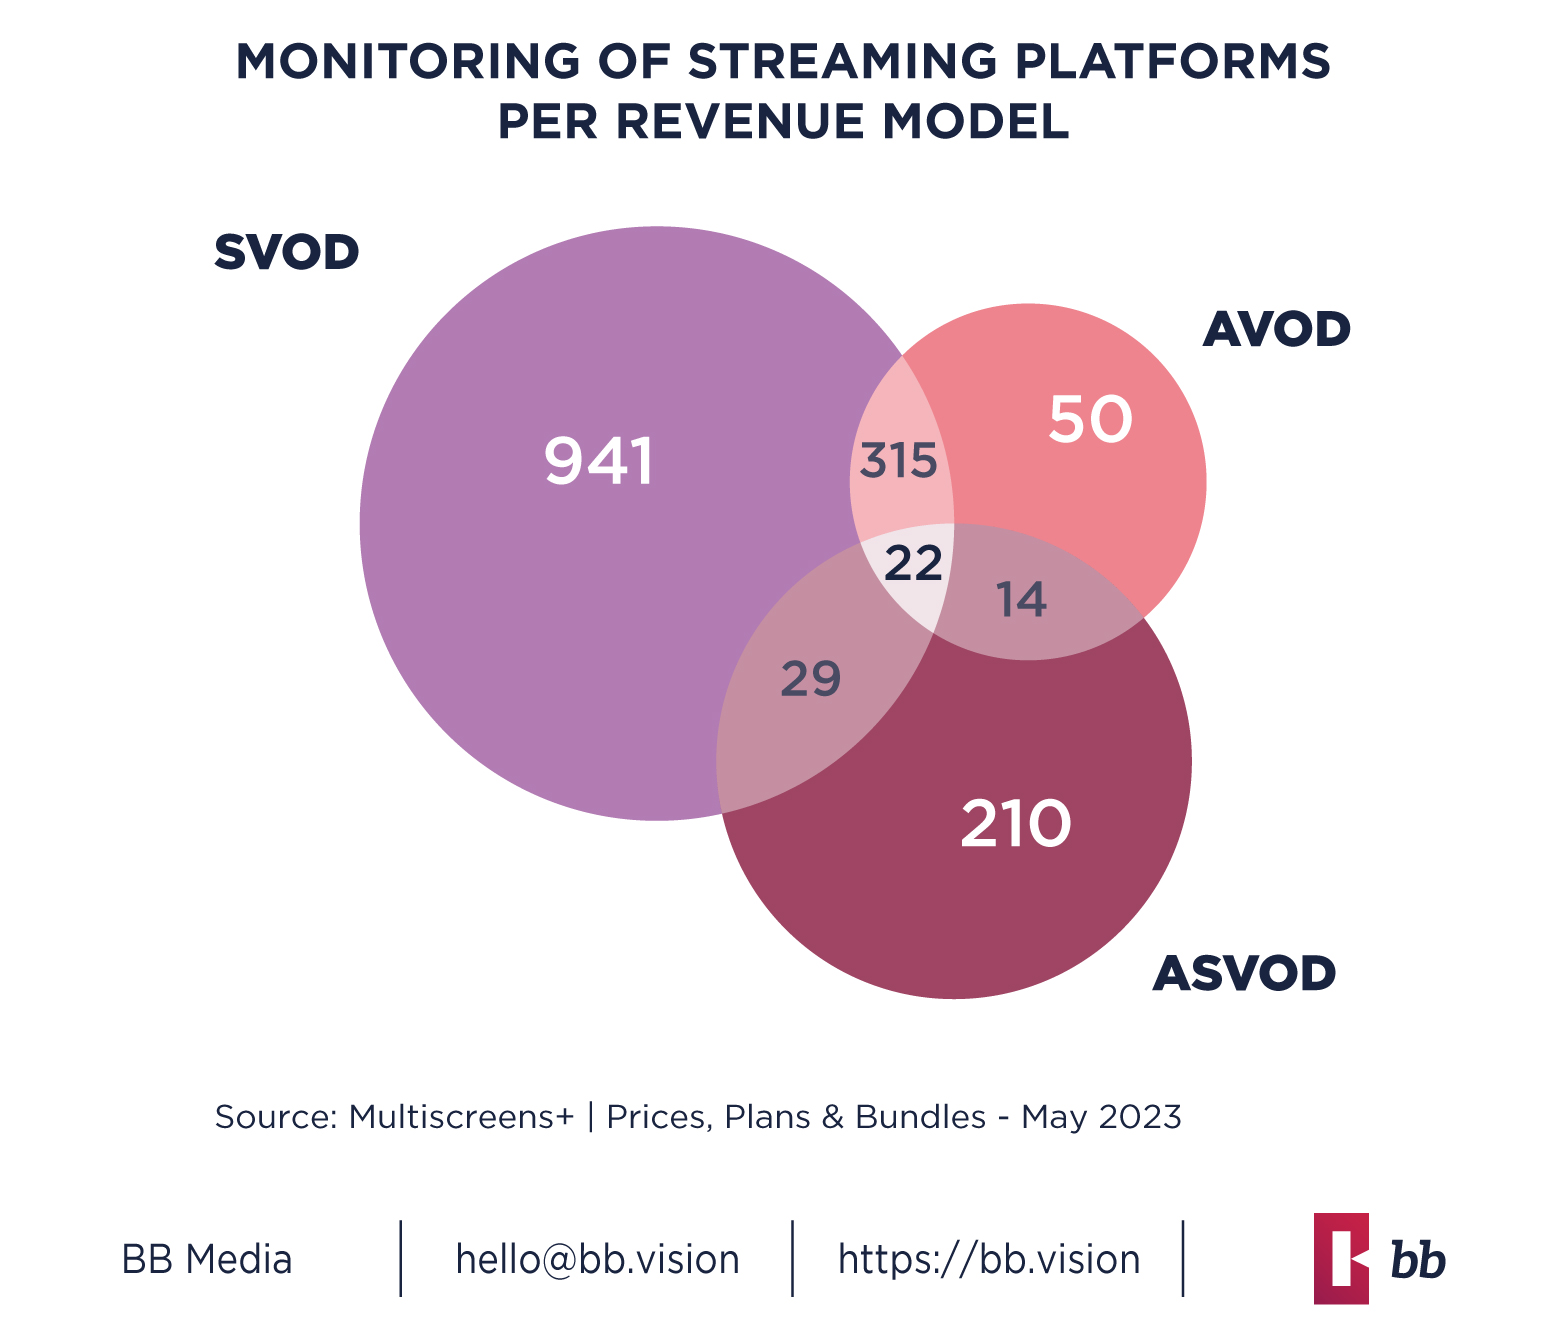 BB Media - Advertising on Streaming Platforms: What Consumers Can Expect